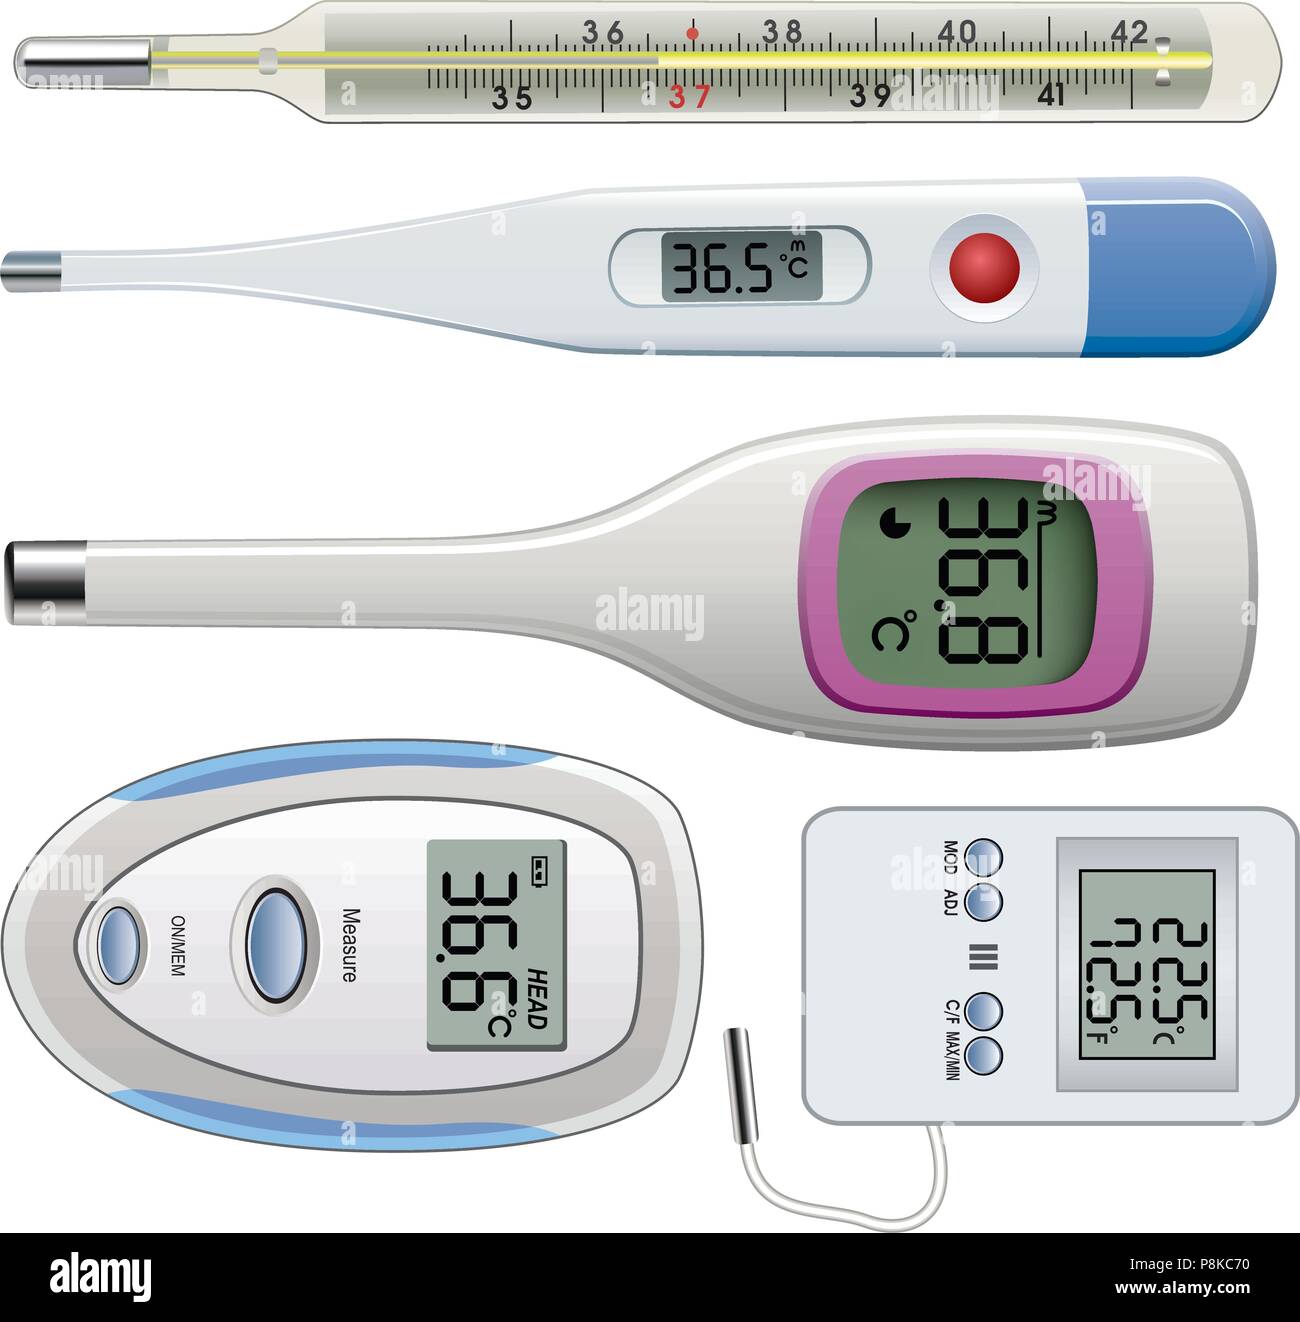 https://c8.alamy.com/comp/P8KC70/vector-set-of-thermometers-of-different-types-P8KC70.jpg